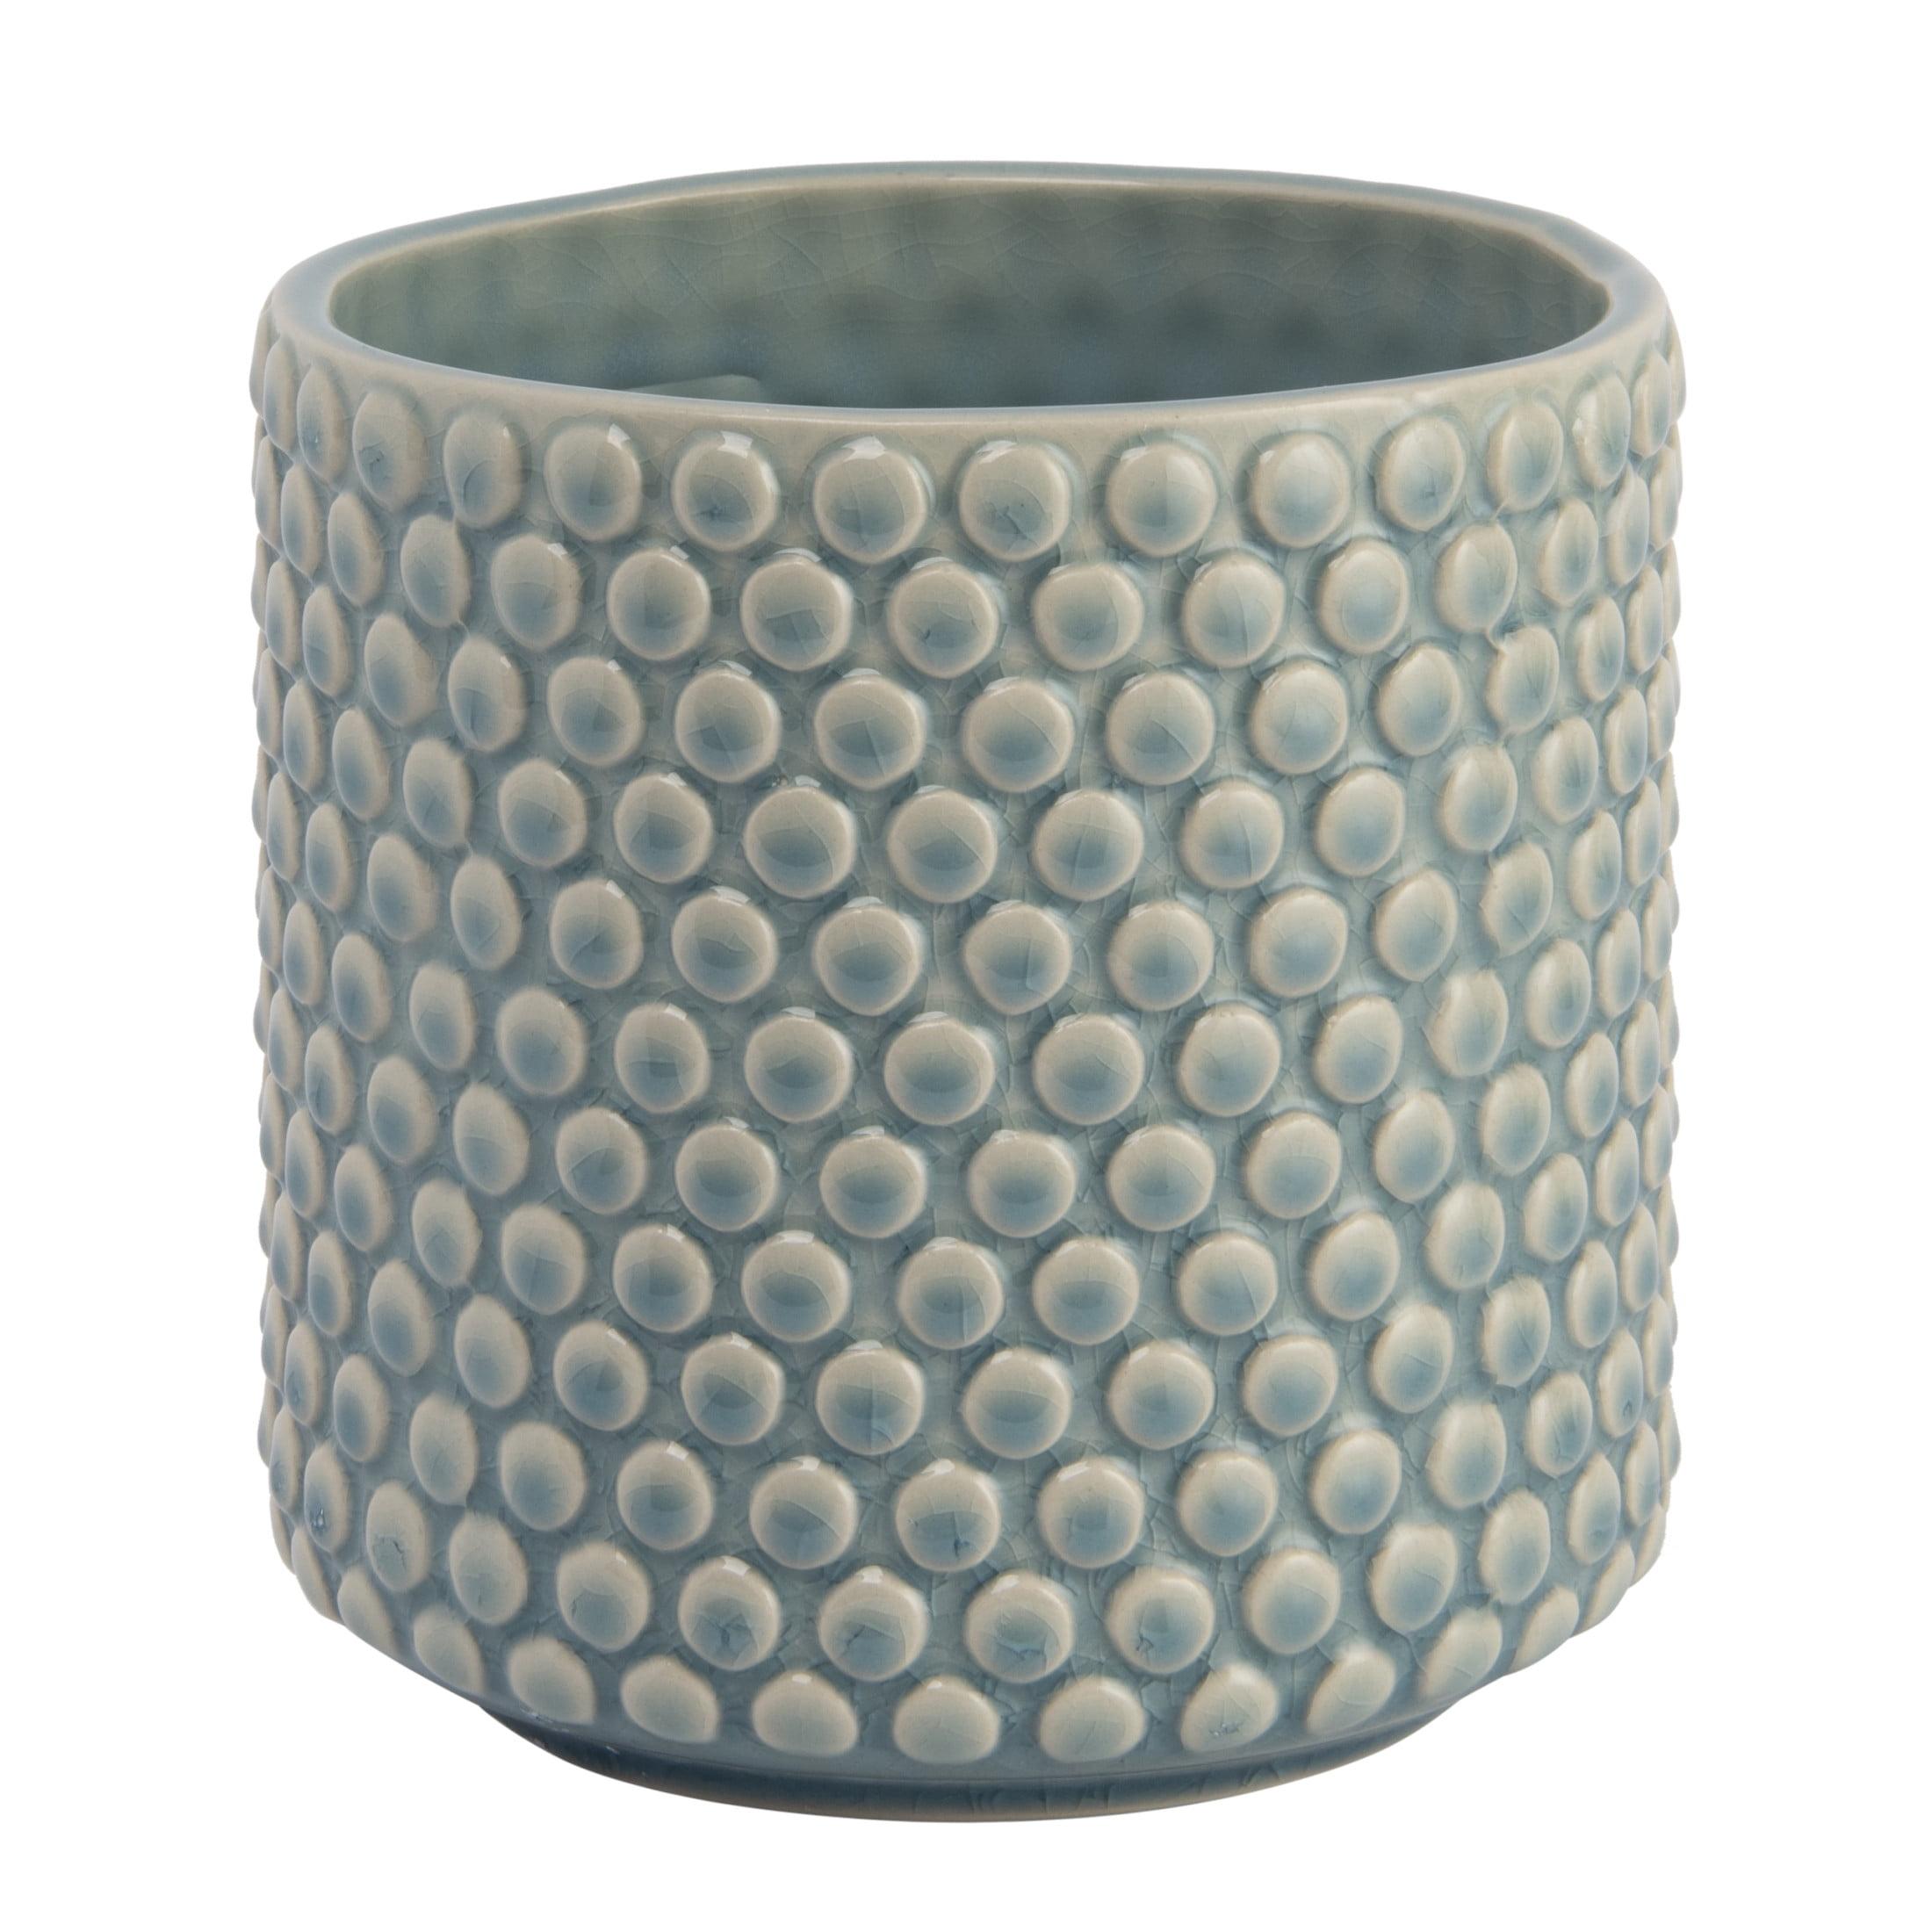 Sky Blue Stoneware Planter Pot with Playful Polka Dots, 6 in